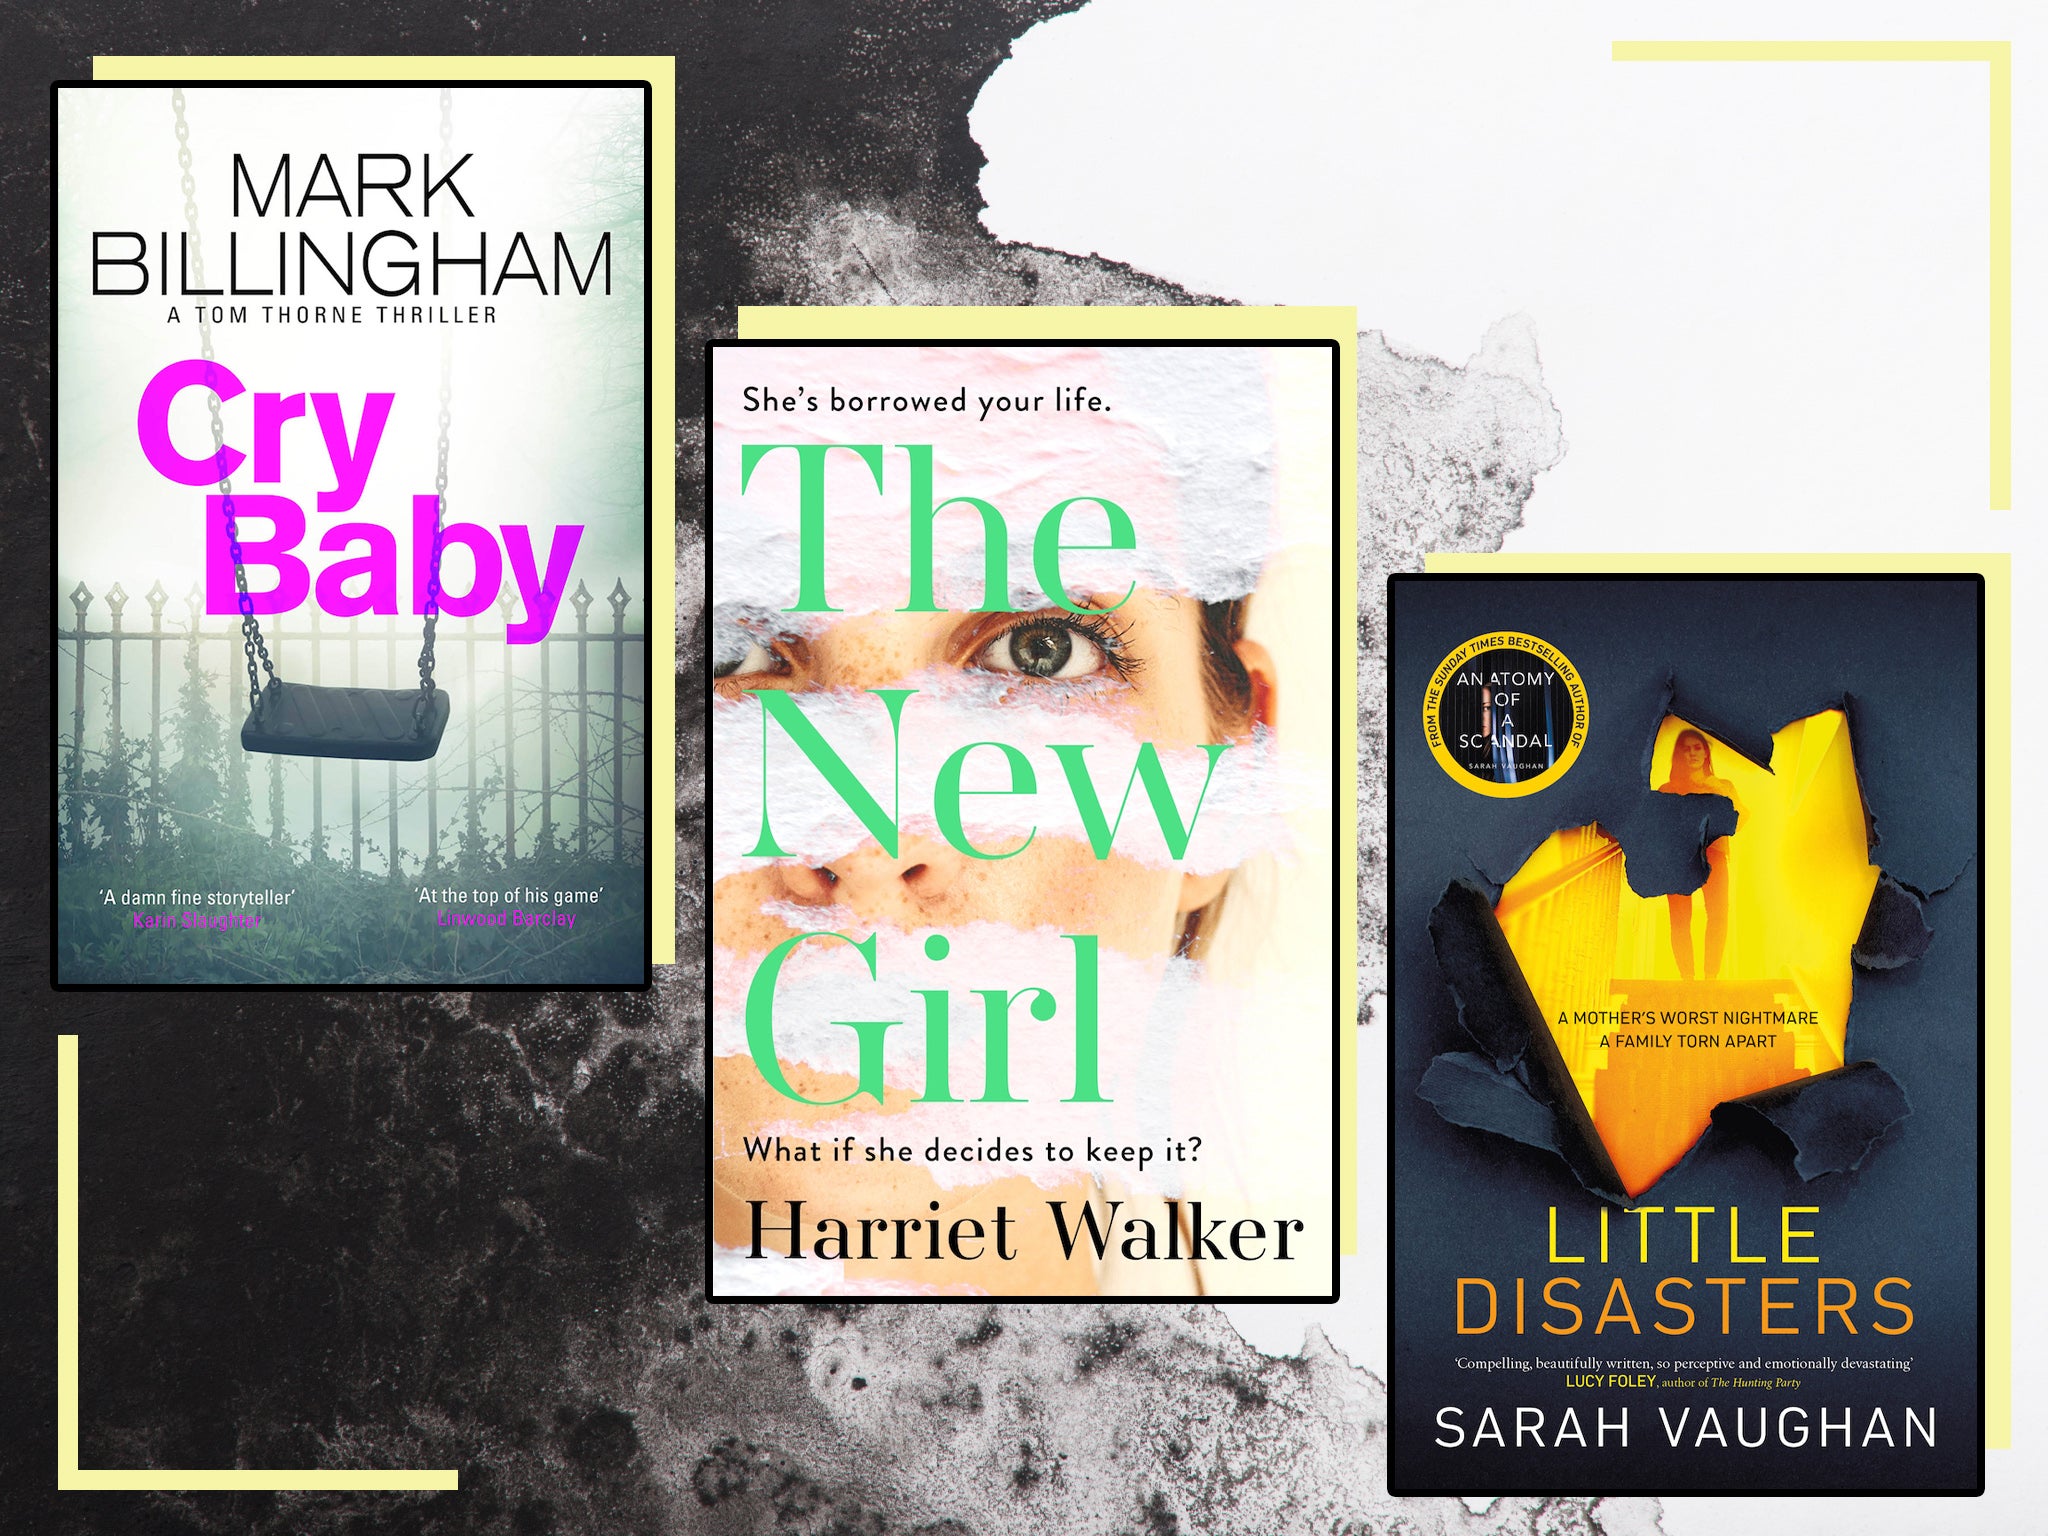 10 best crime novels and thrillers of 2020 that you won’t be able to p